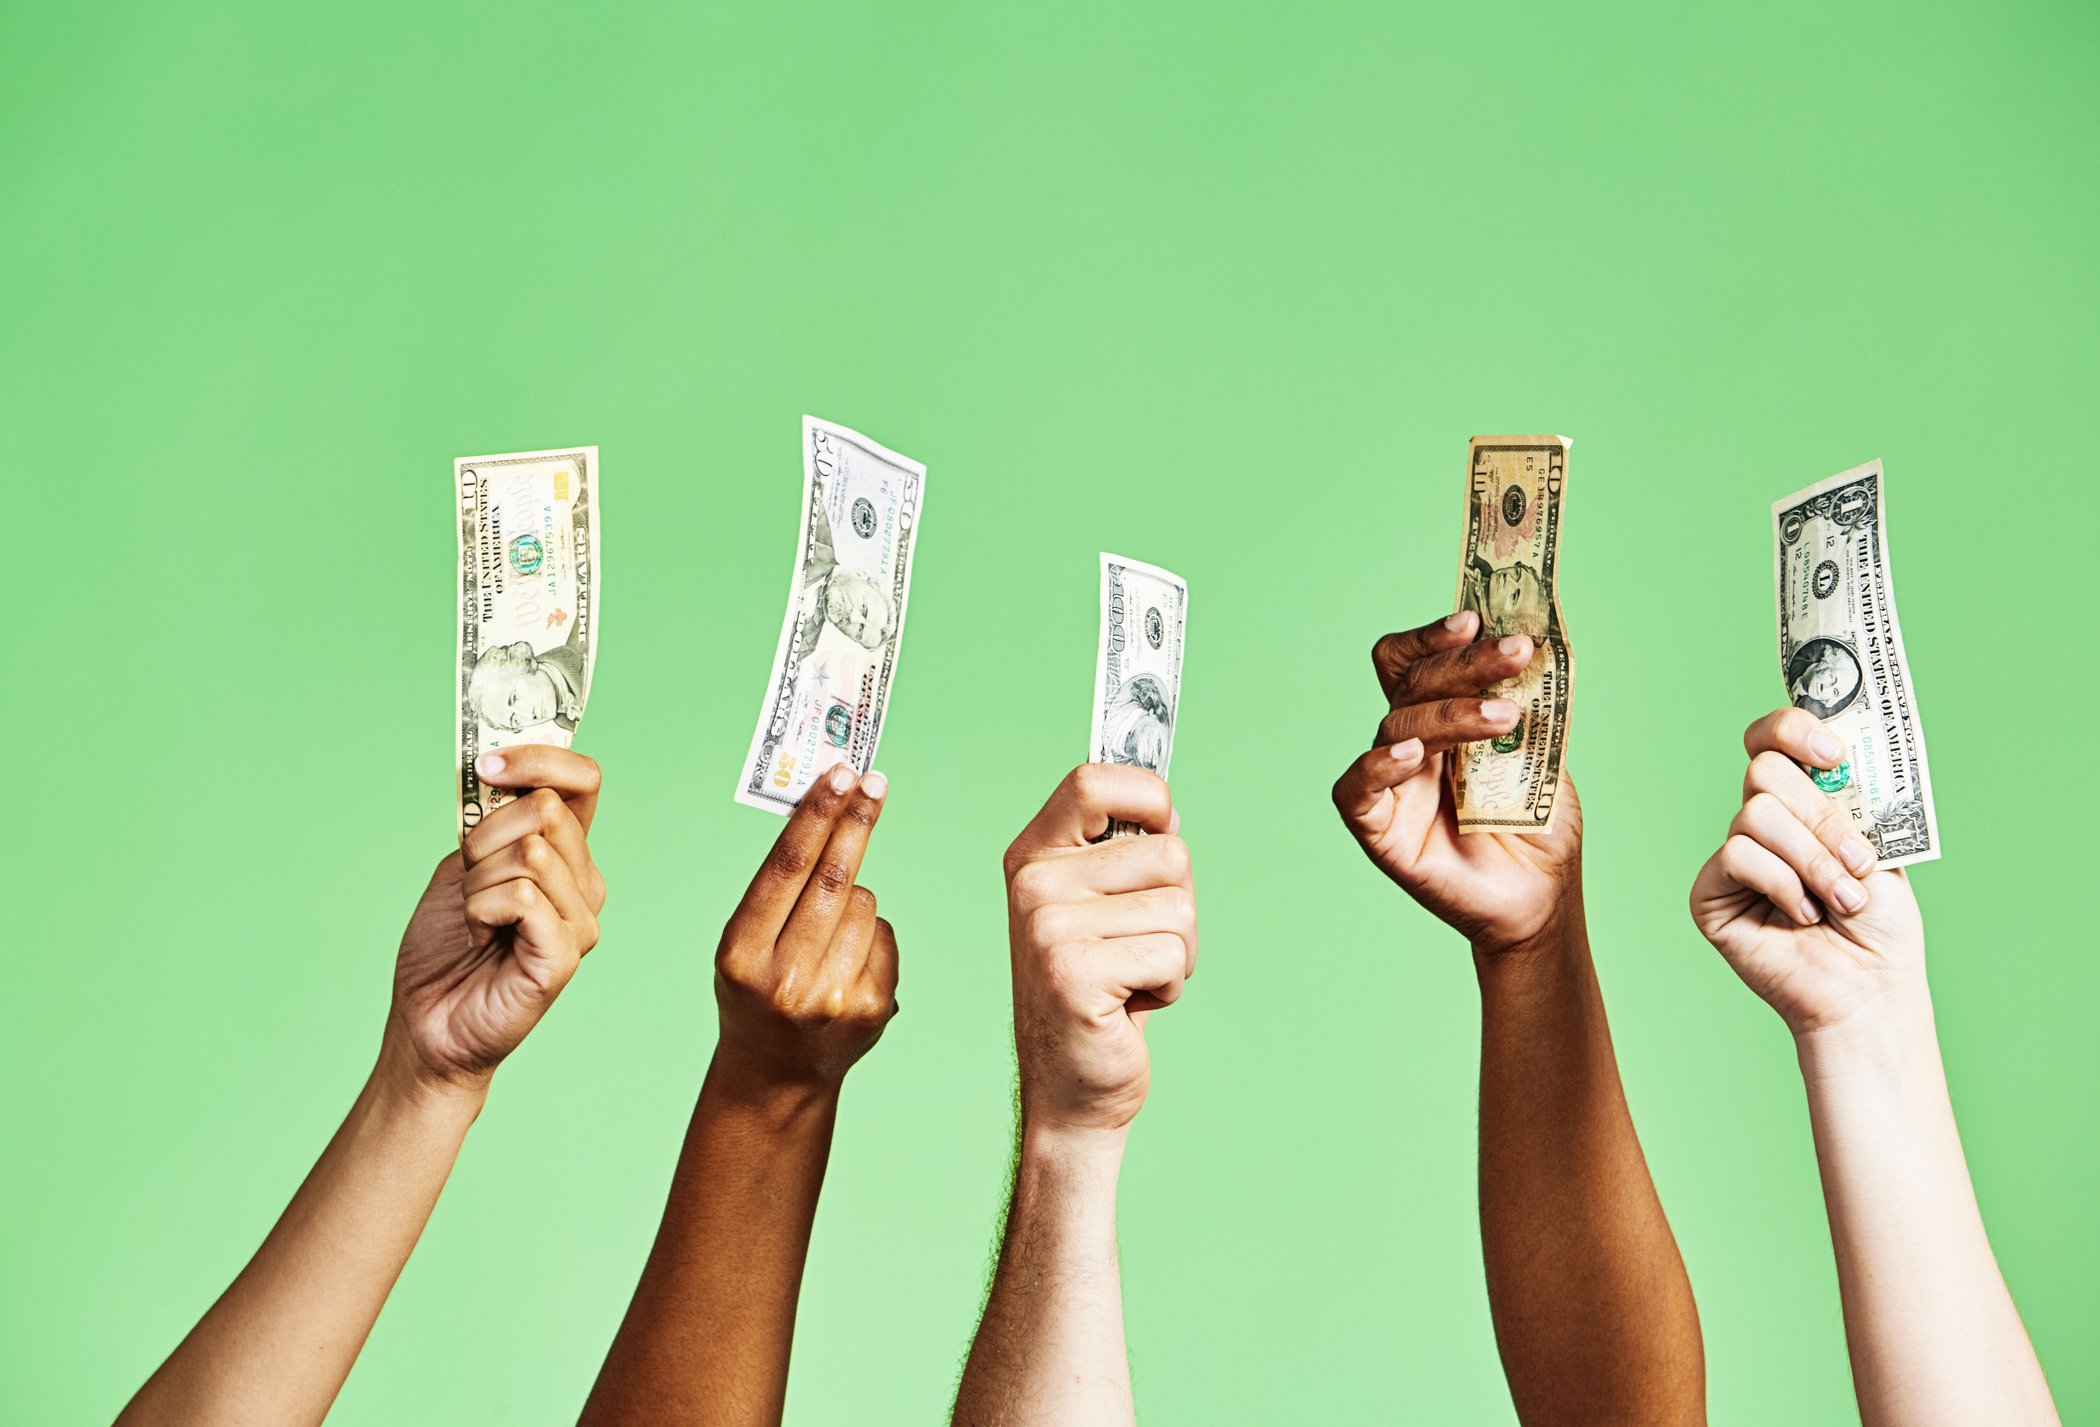 Diverse group of hands holding up US dollar banknotes of various denominations on green background - stock photo